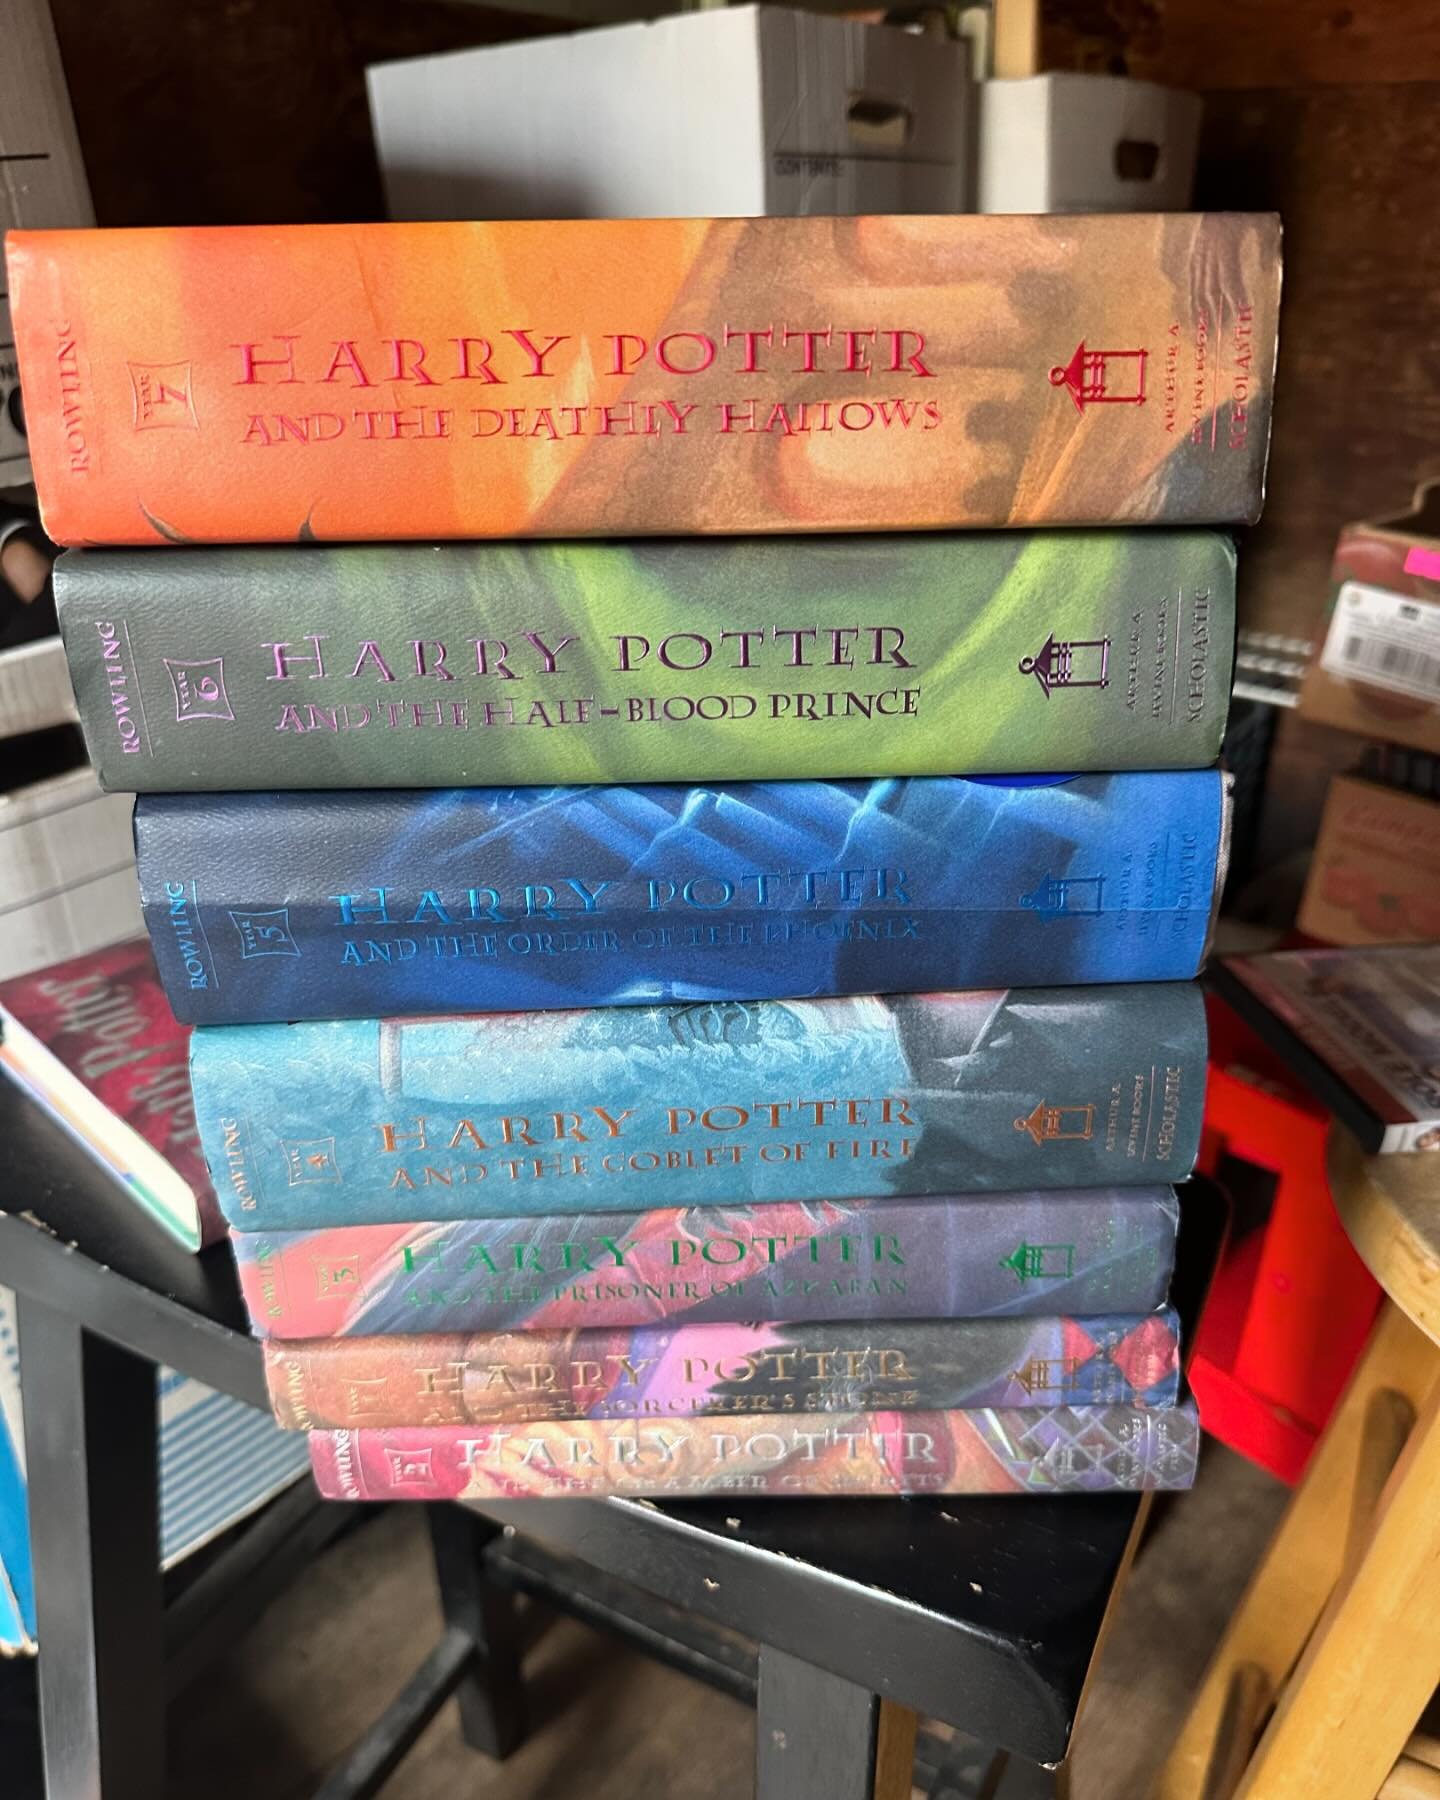 Calling all Potter Heads!

Each summer Alexis collects the full HP series to deliver to kids living under-resourced communities. These sets are extremely popular and it takes months to collect all seven books. 

If you are cleaning out your library, 